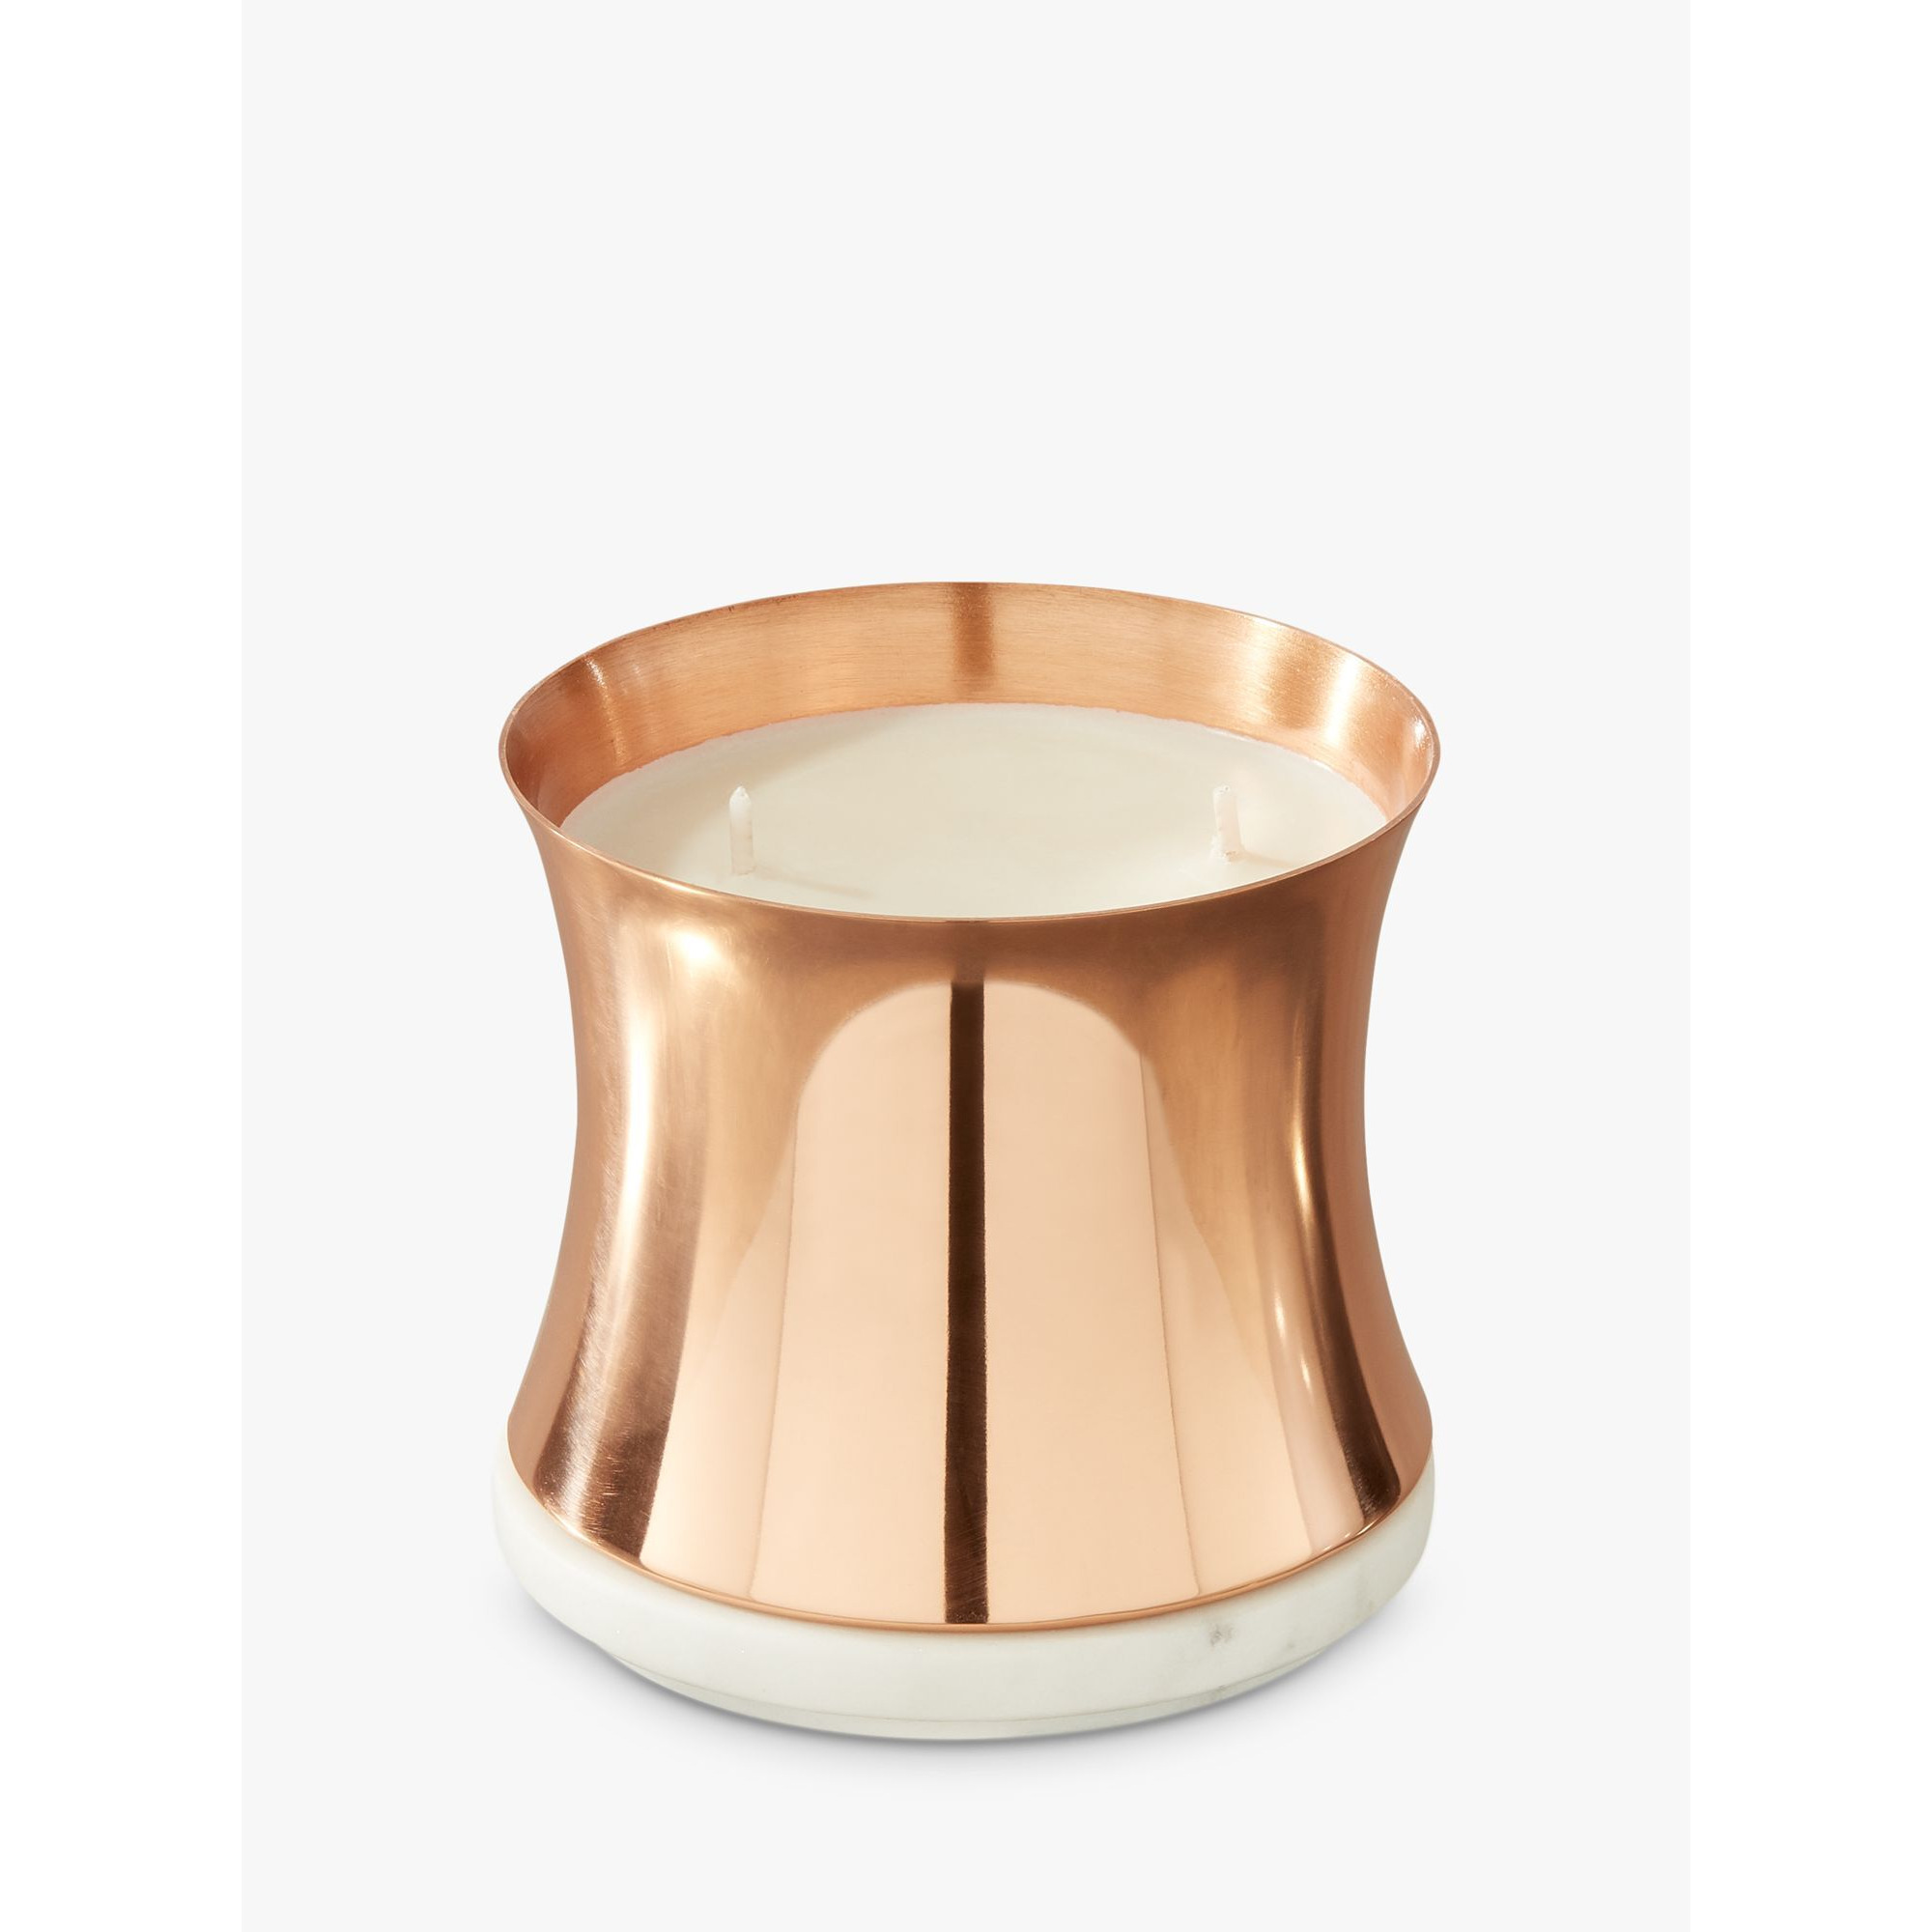 Tom Dixon London Scented Candle, 250g - image 1